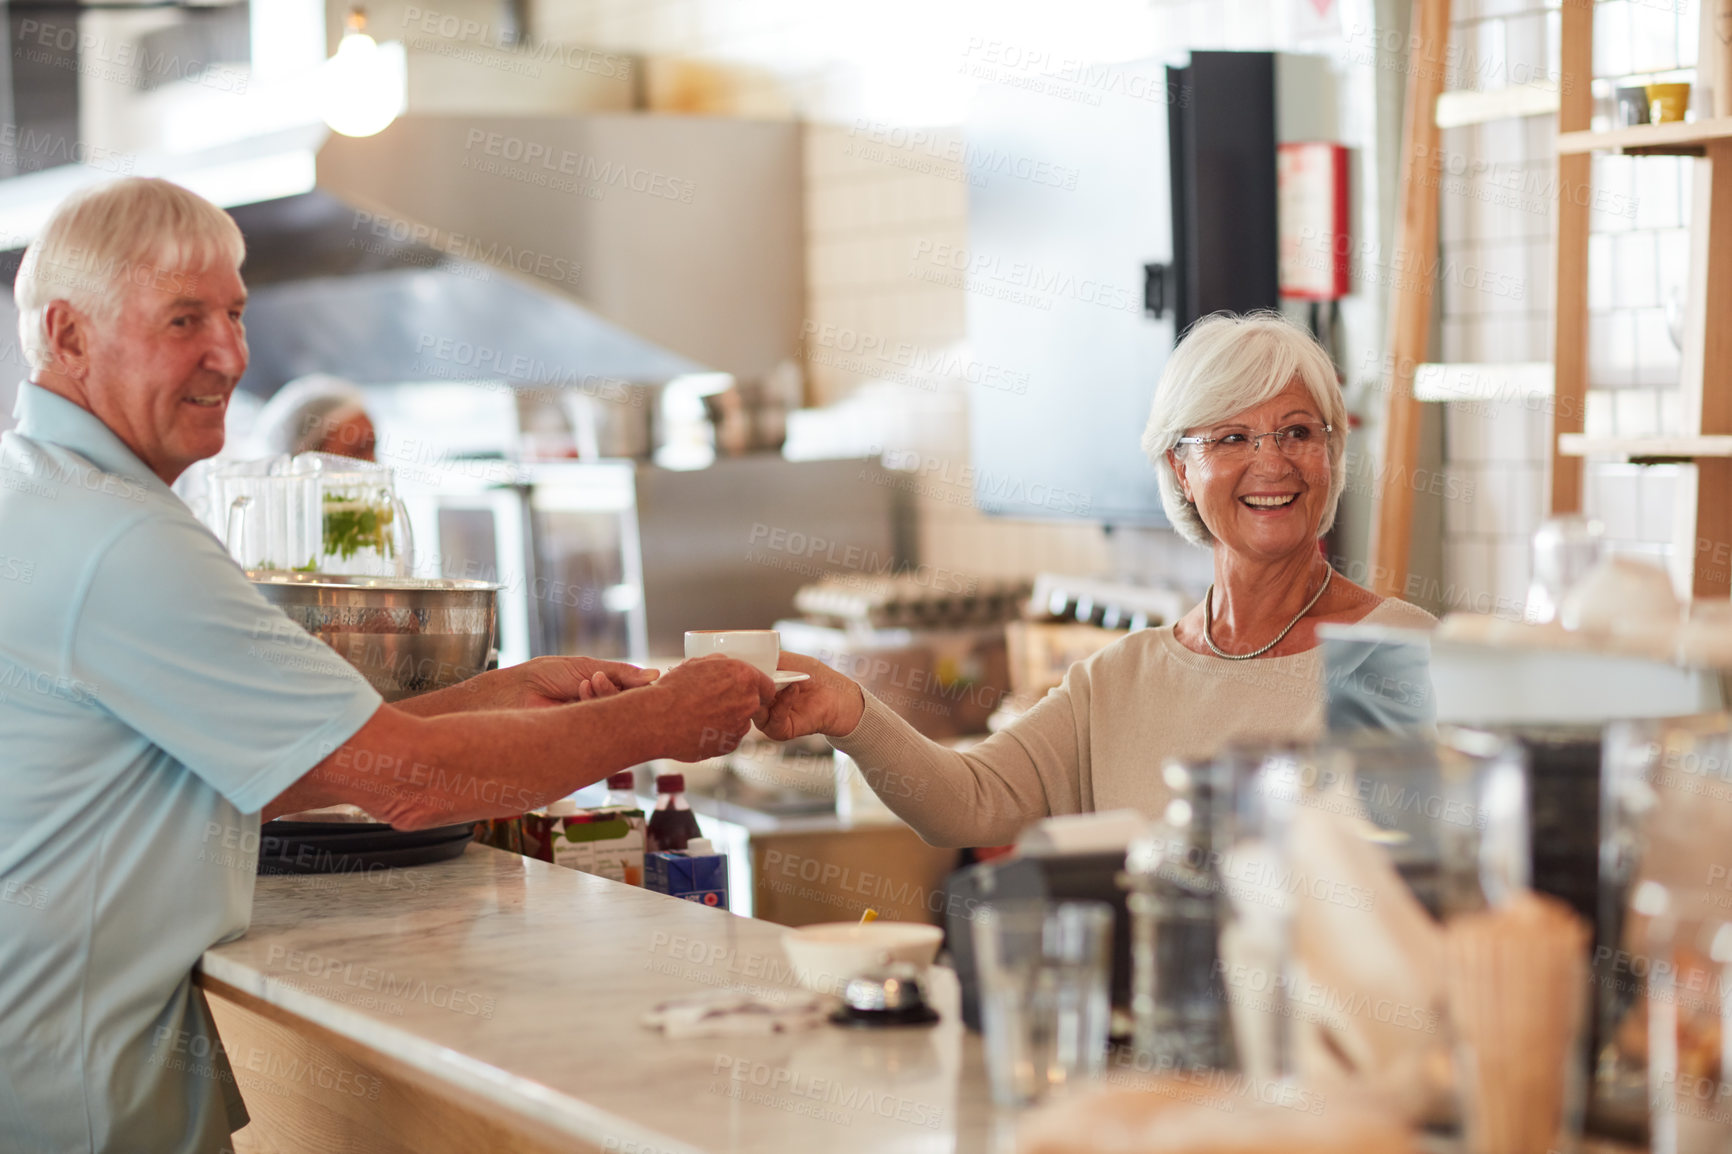 Buy stock photo Shot of a happy senior woman serving a customer a cup of coffee in a cafe